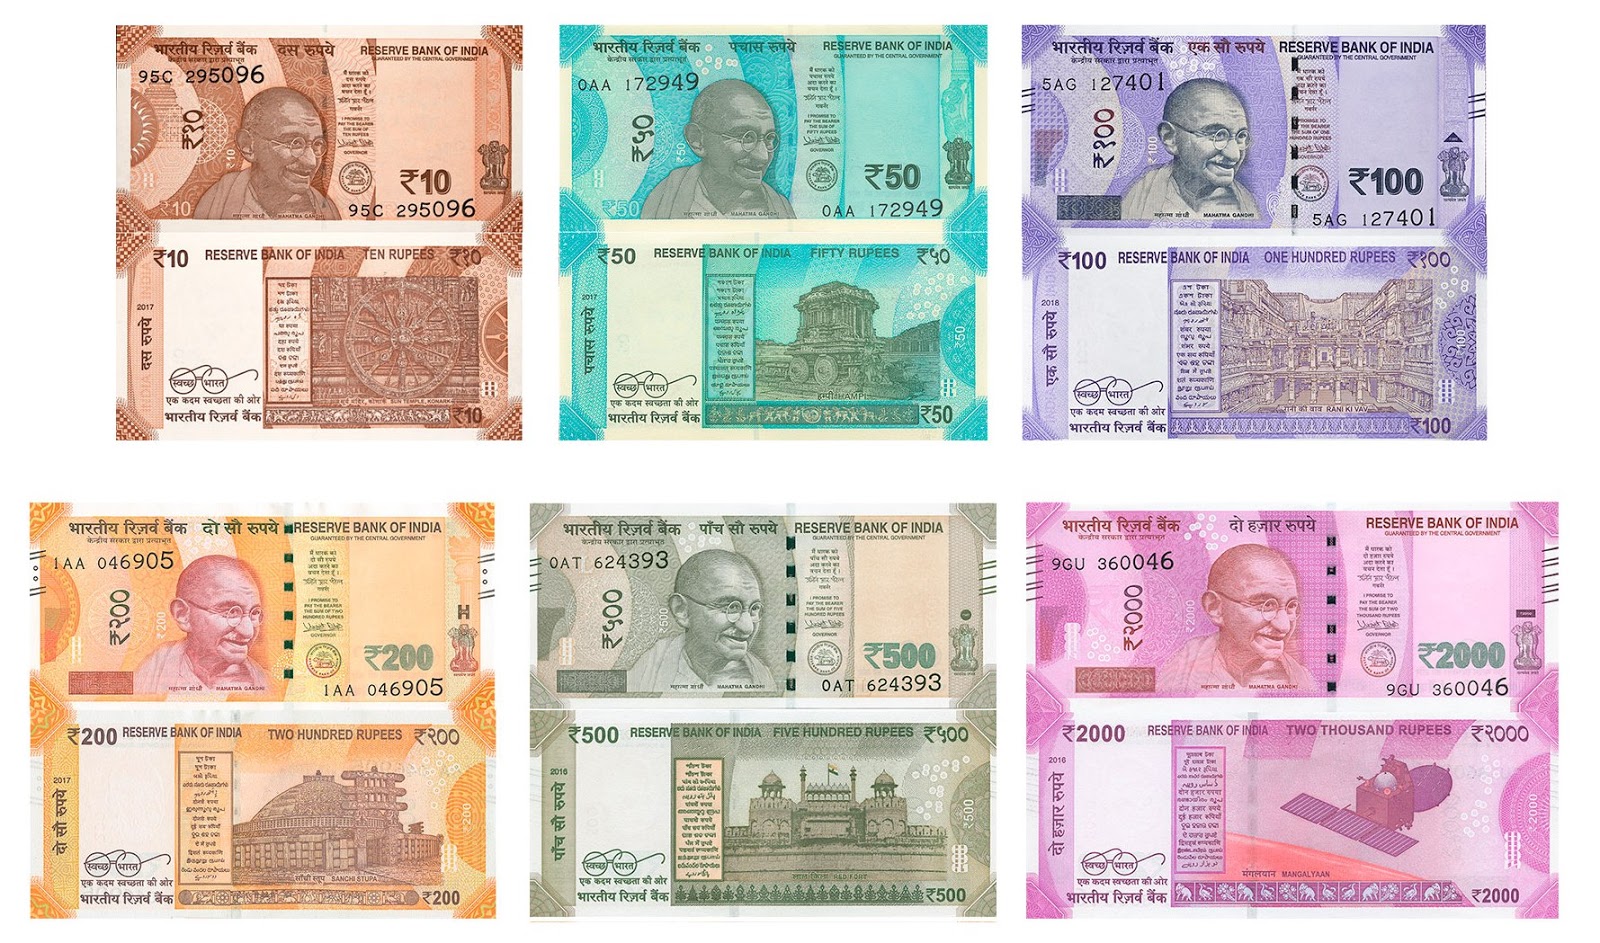 Pictures In Indian Currency